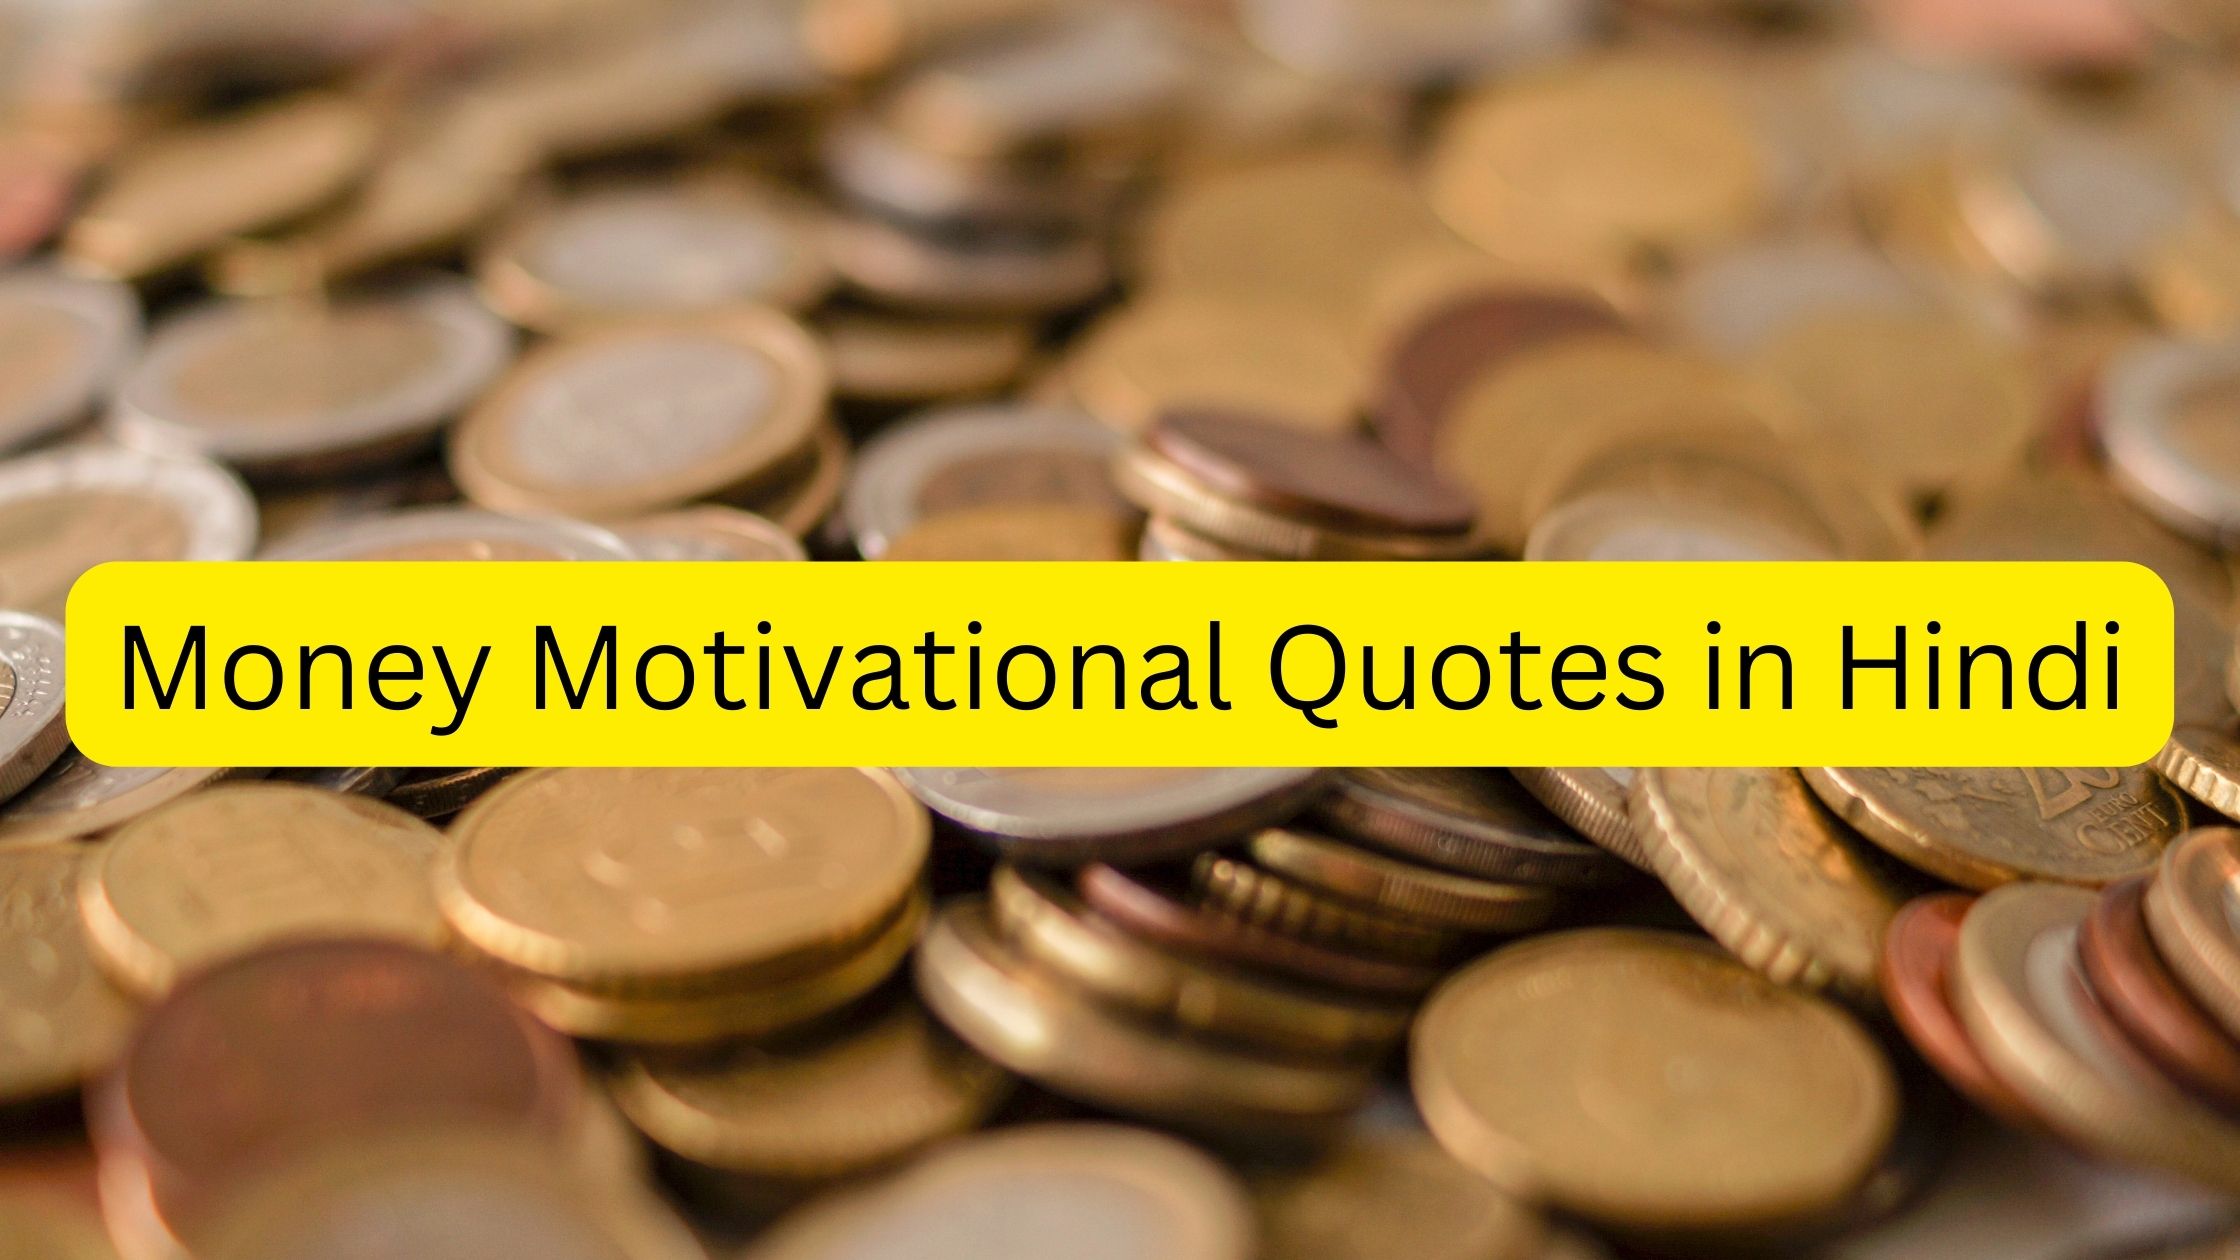 Money Motivational Quotes in Hindi